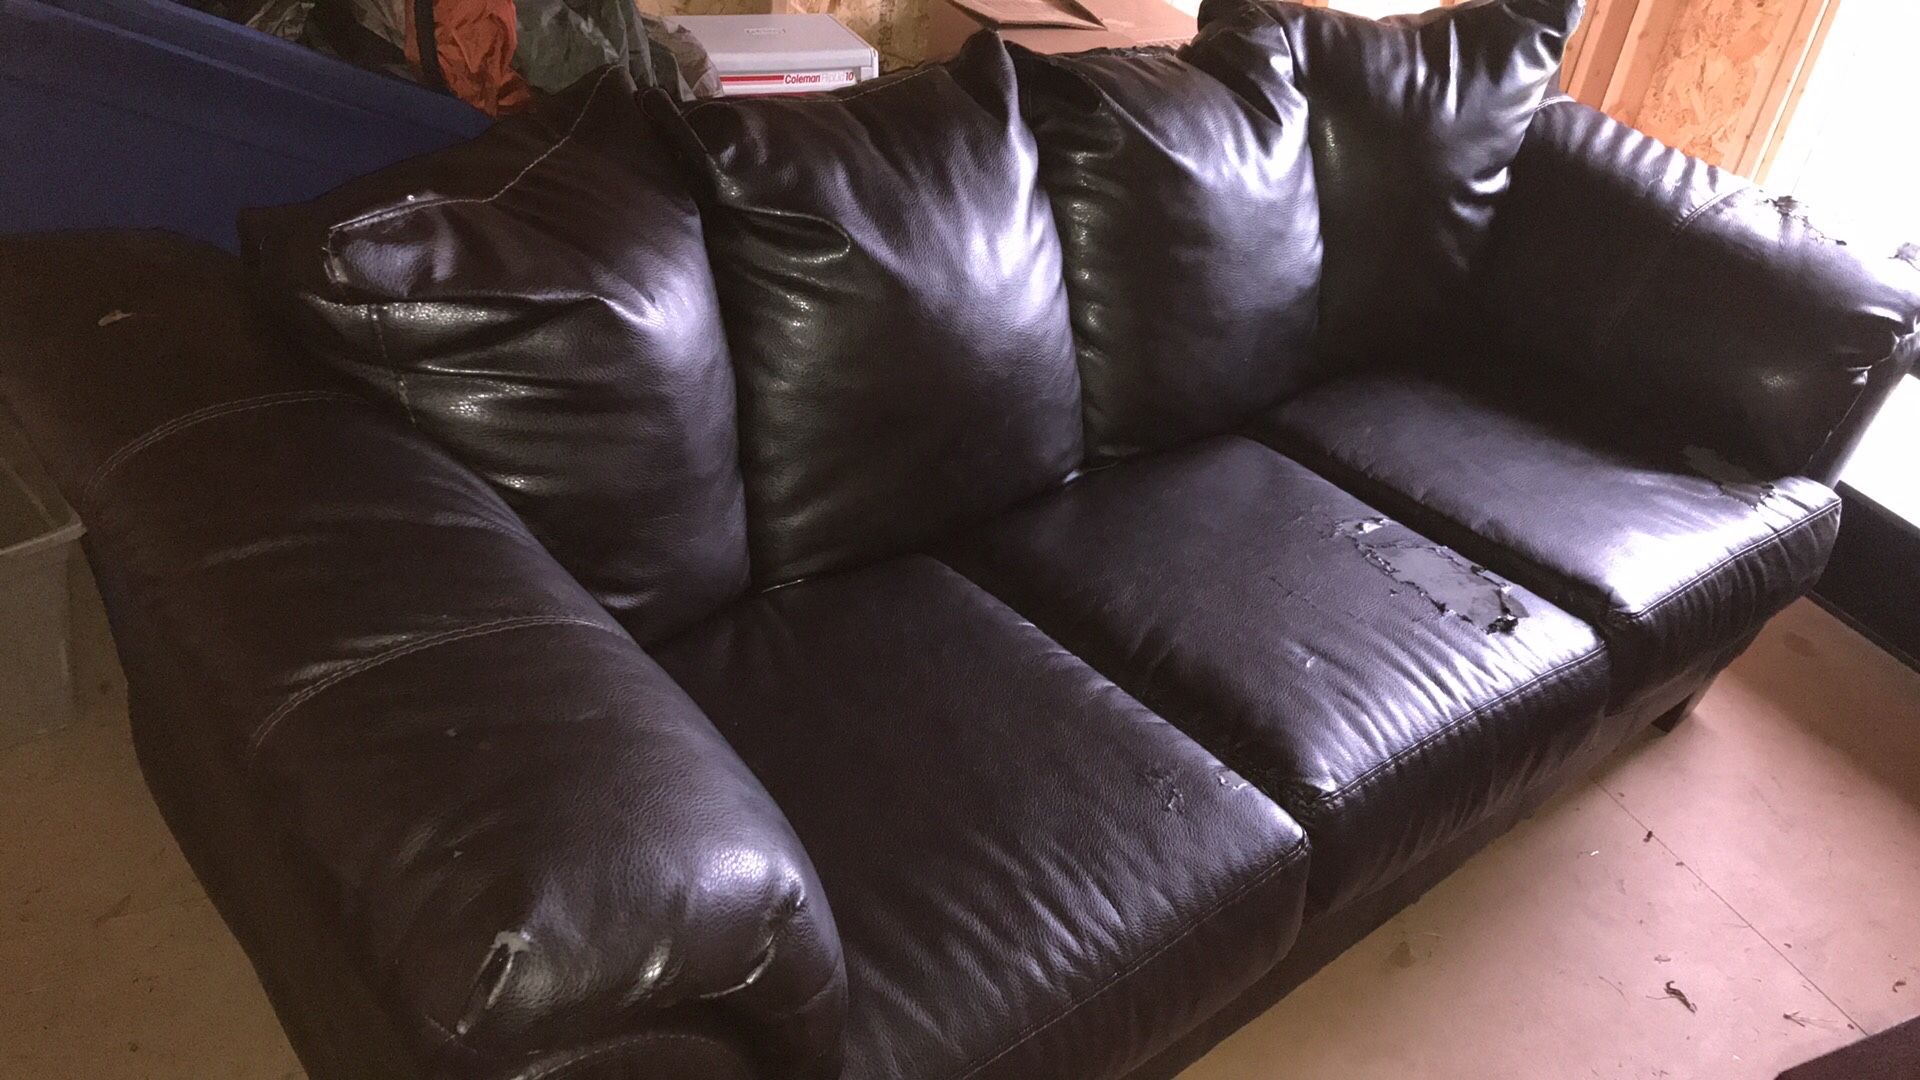 Dark Brown Faux Leather Couch